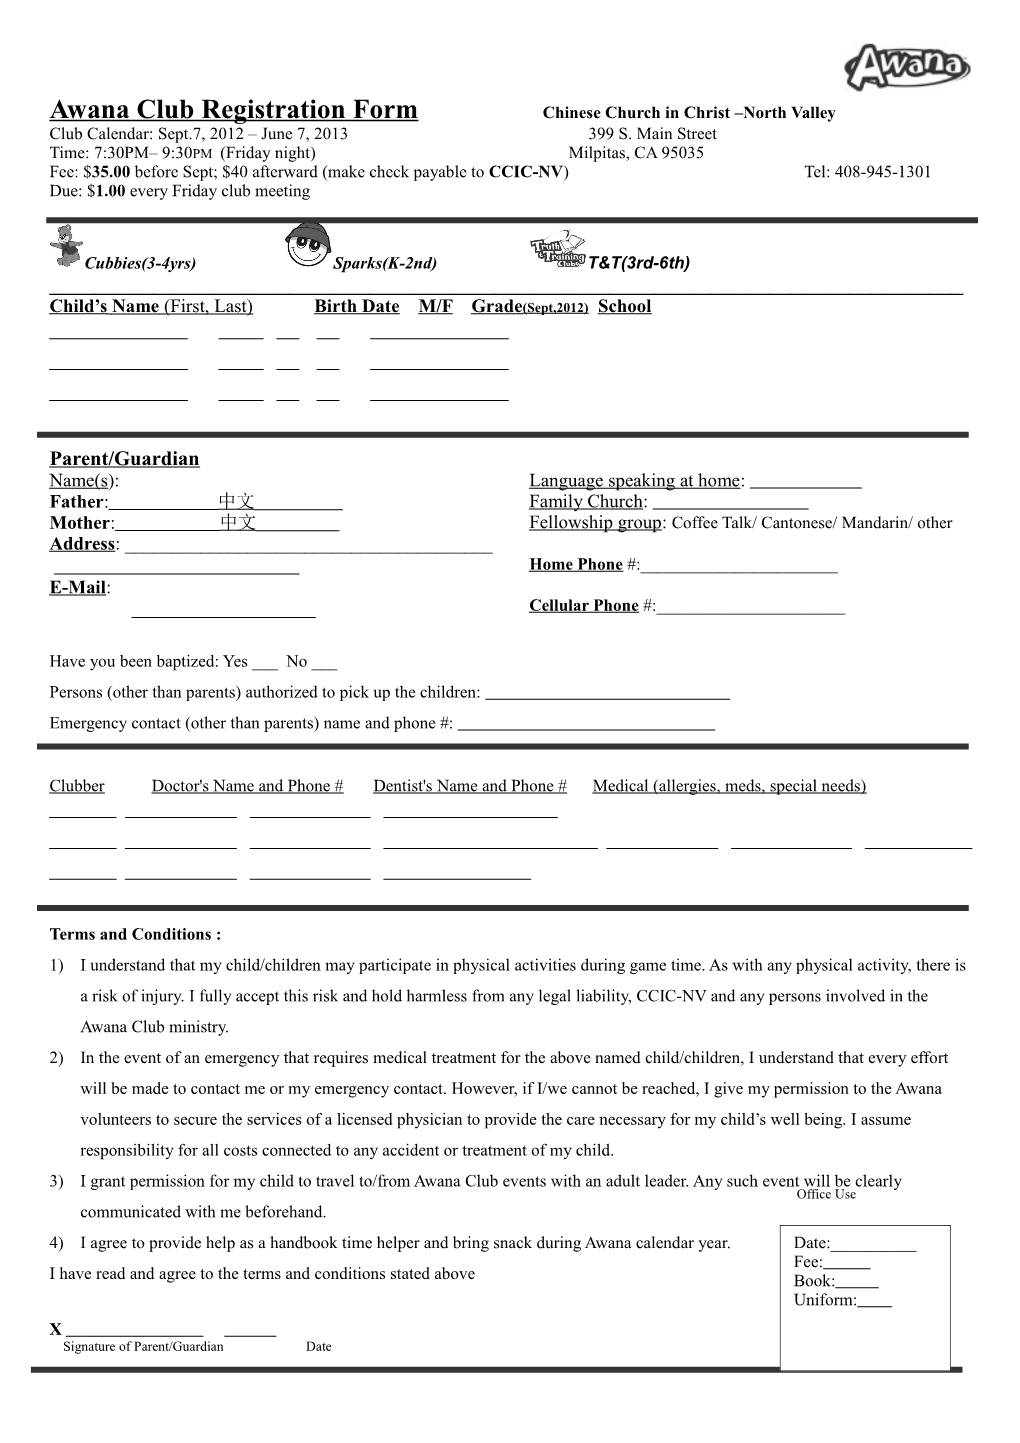 Awana Club Registration Form Chinese Church in Christ - North Valley